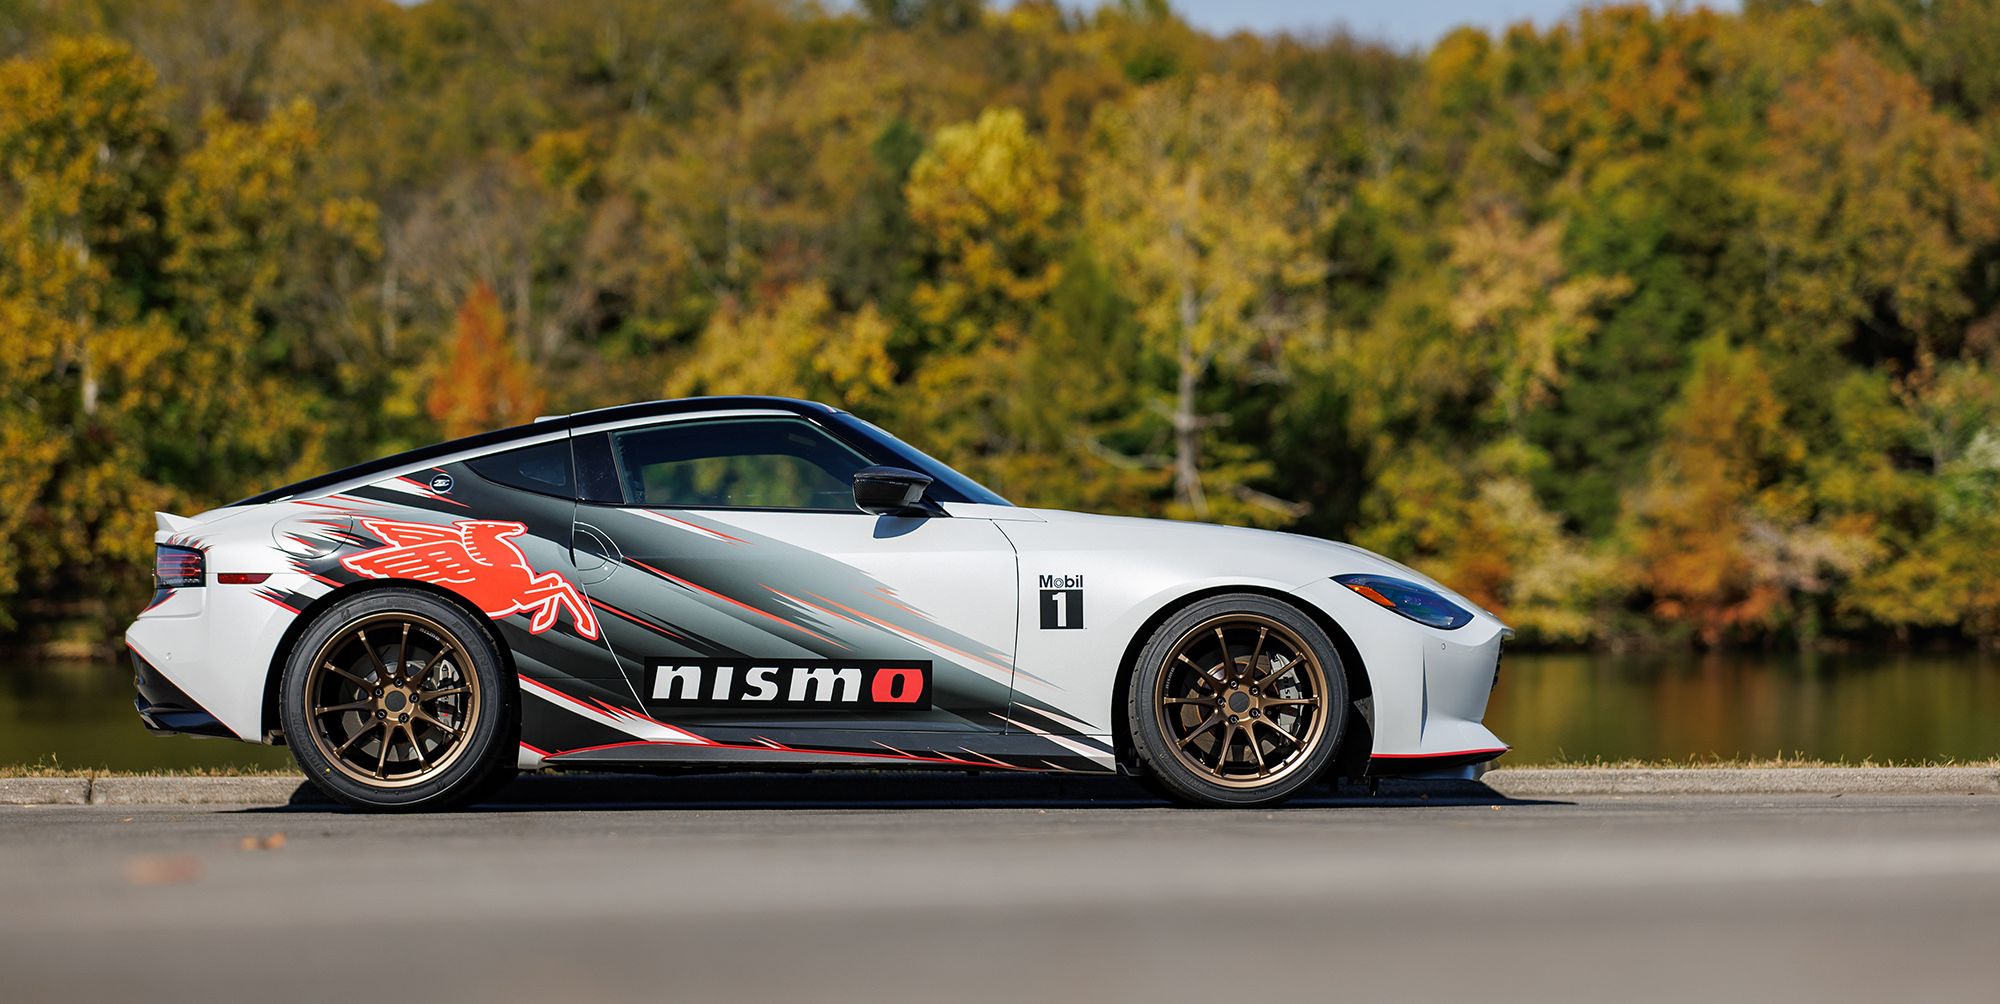 Nismo Brings Range of Performance Upgrades for New Z to SEMA